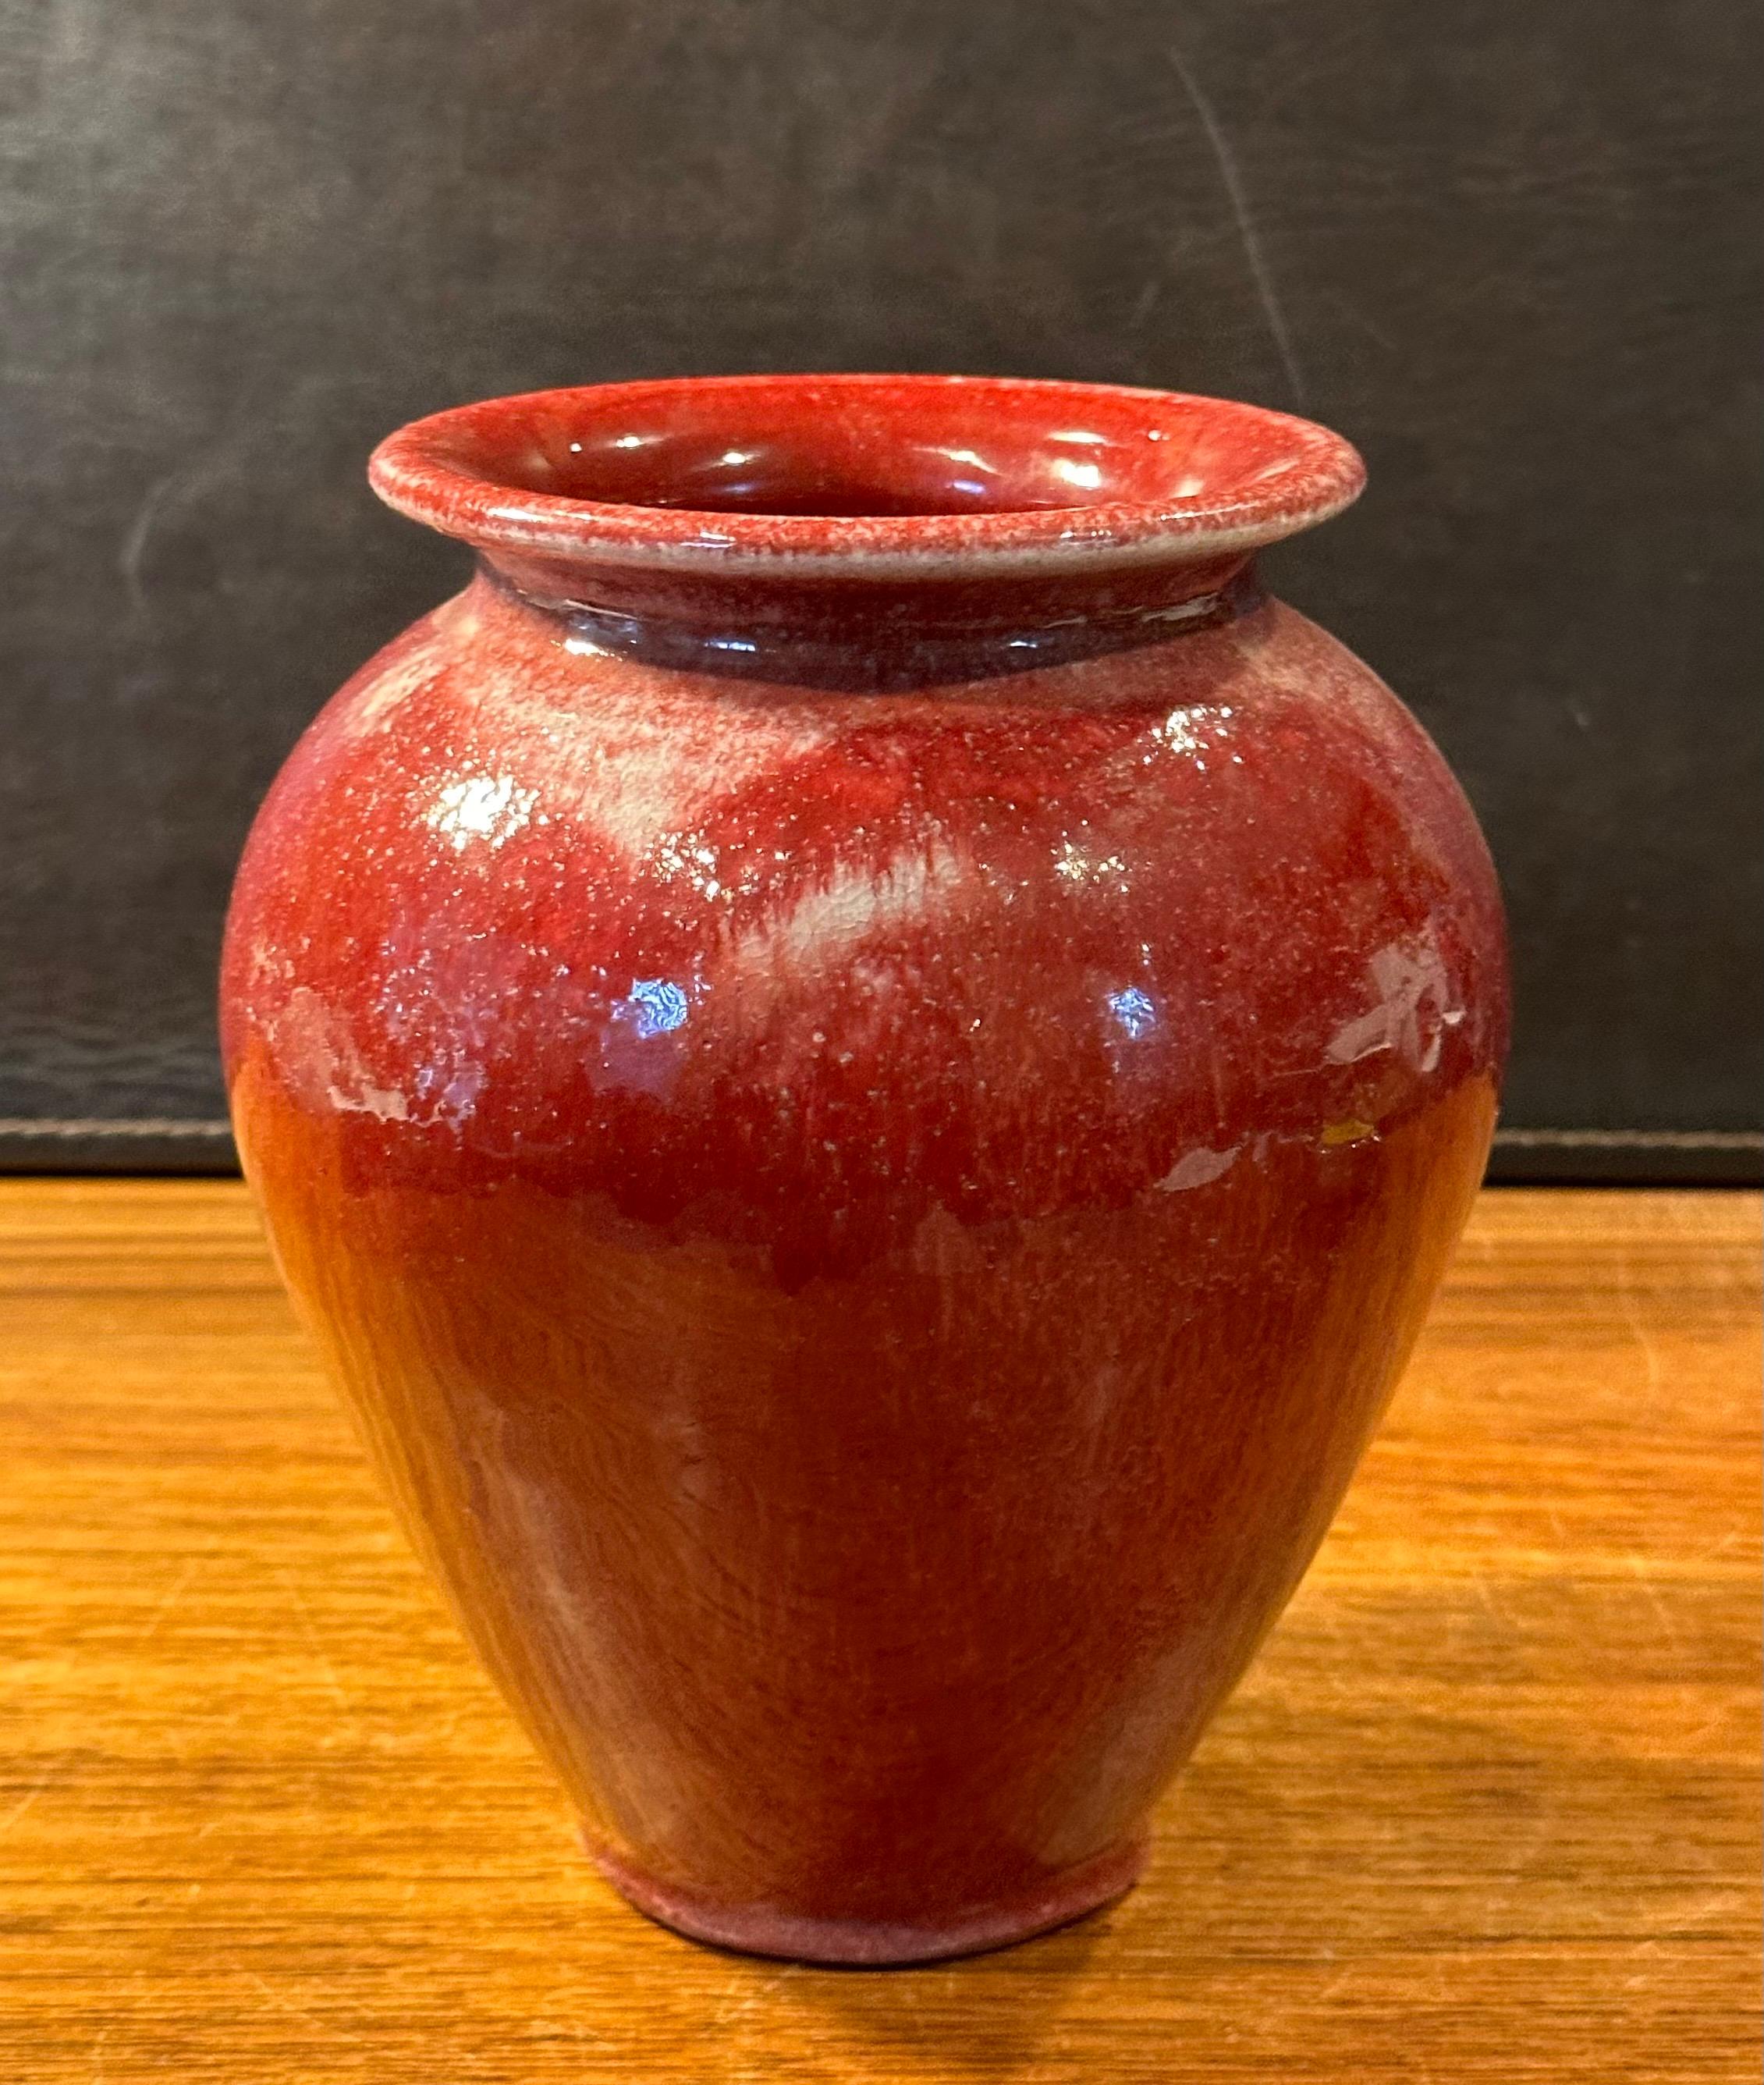 A vibrant cabernet red ceramic vase by noted San Diego potter Alex Long, circa 2004.  The hand thrown vase is in great vintage condition with no chips or cracks and it measures 6